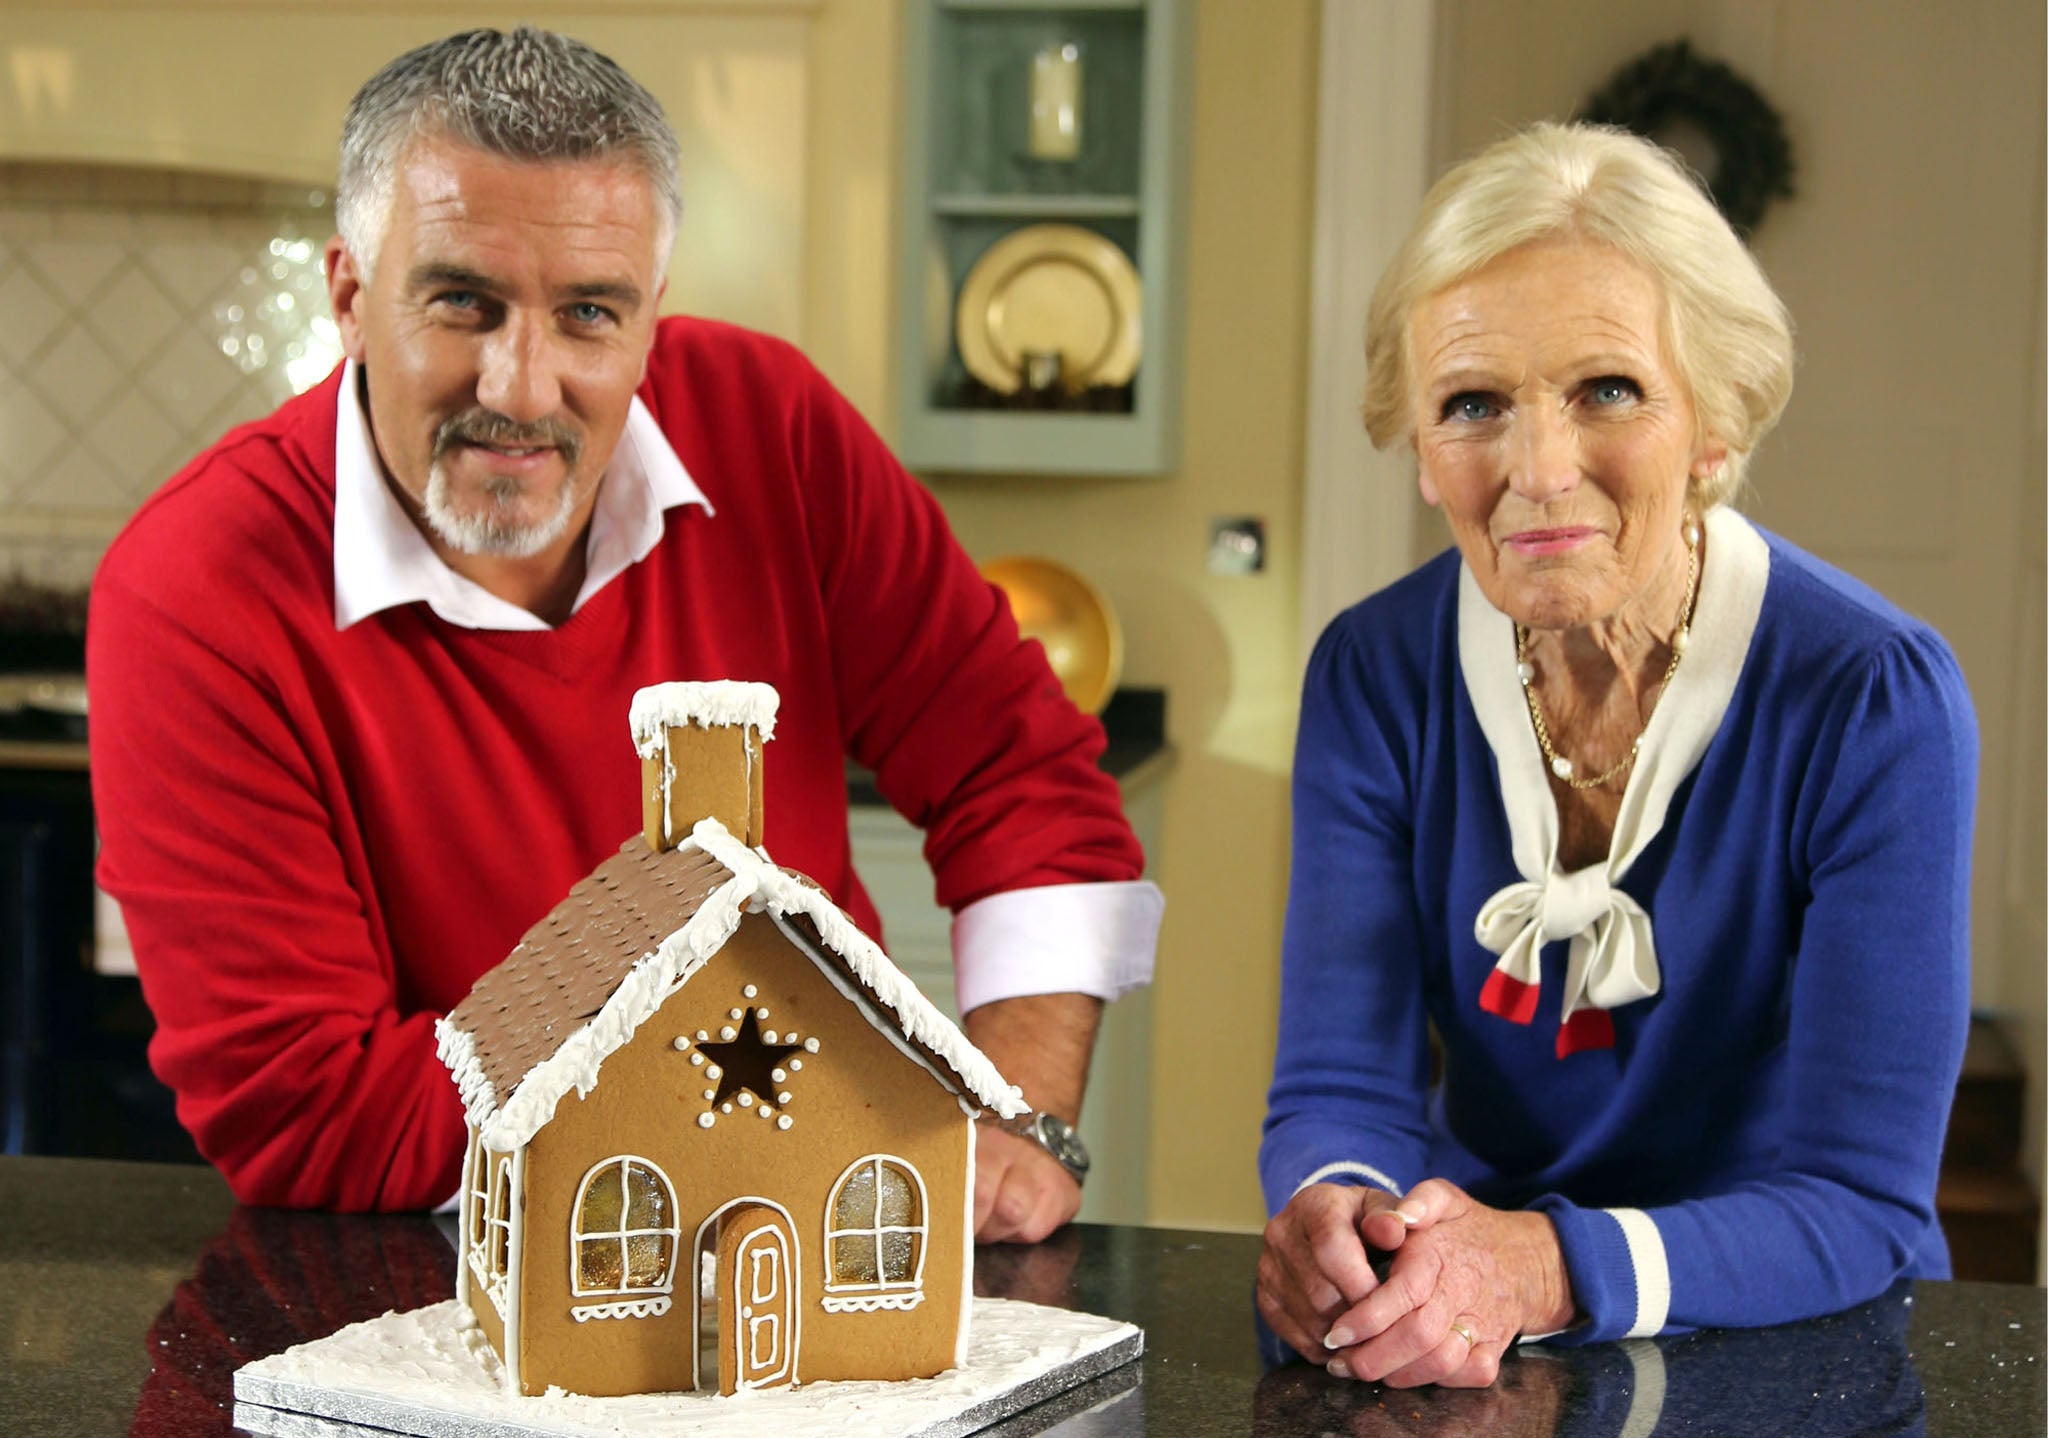 Mary Berry and Paul Hollywood will present a Christmas Bake-Off masterclass